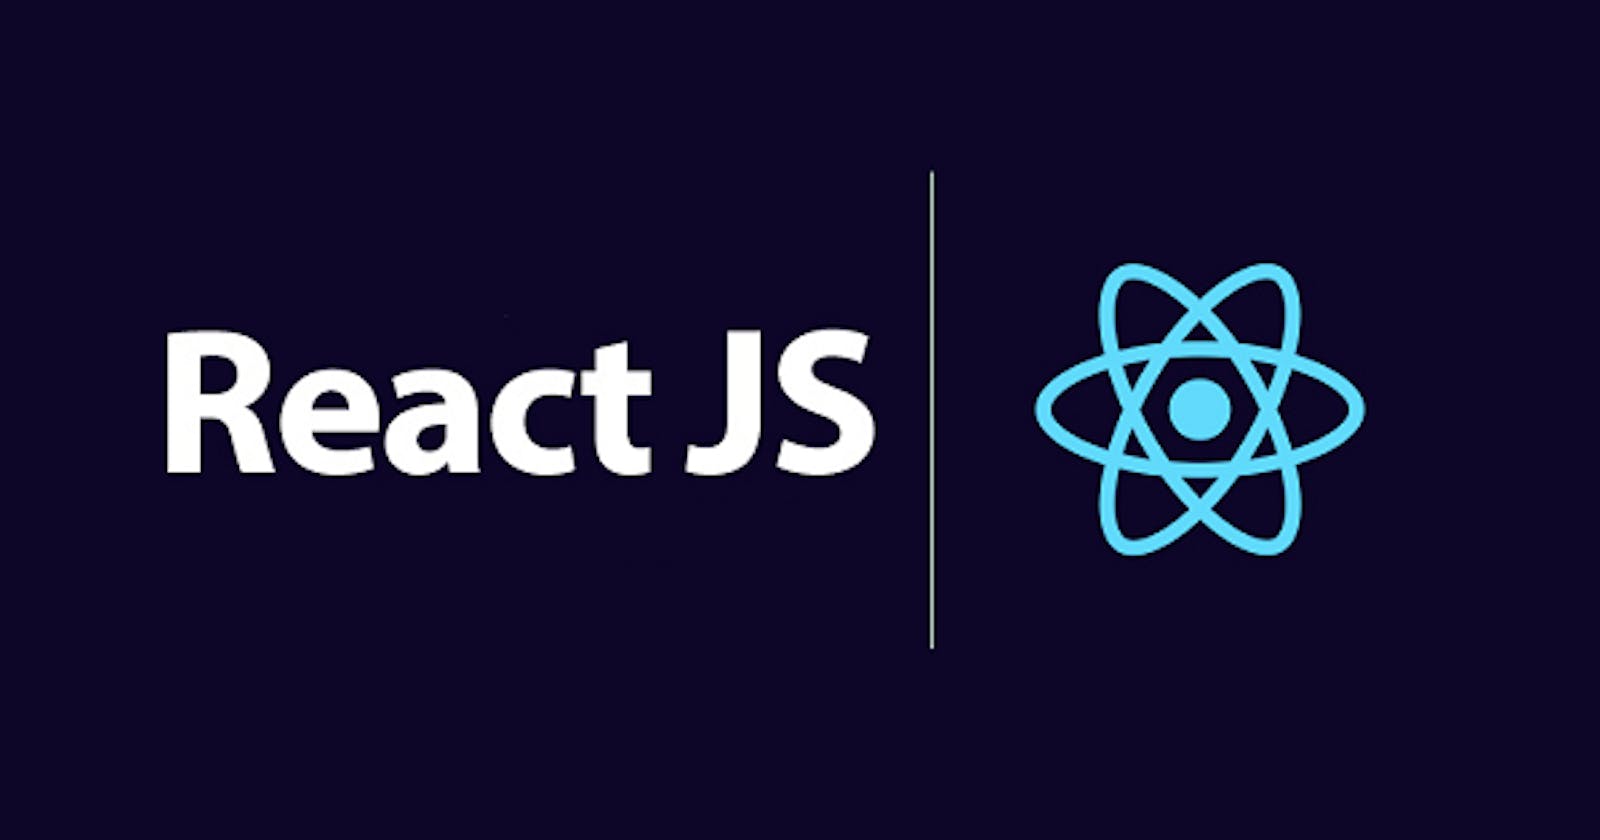 How to update Child's state from Parent in React.